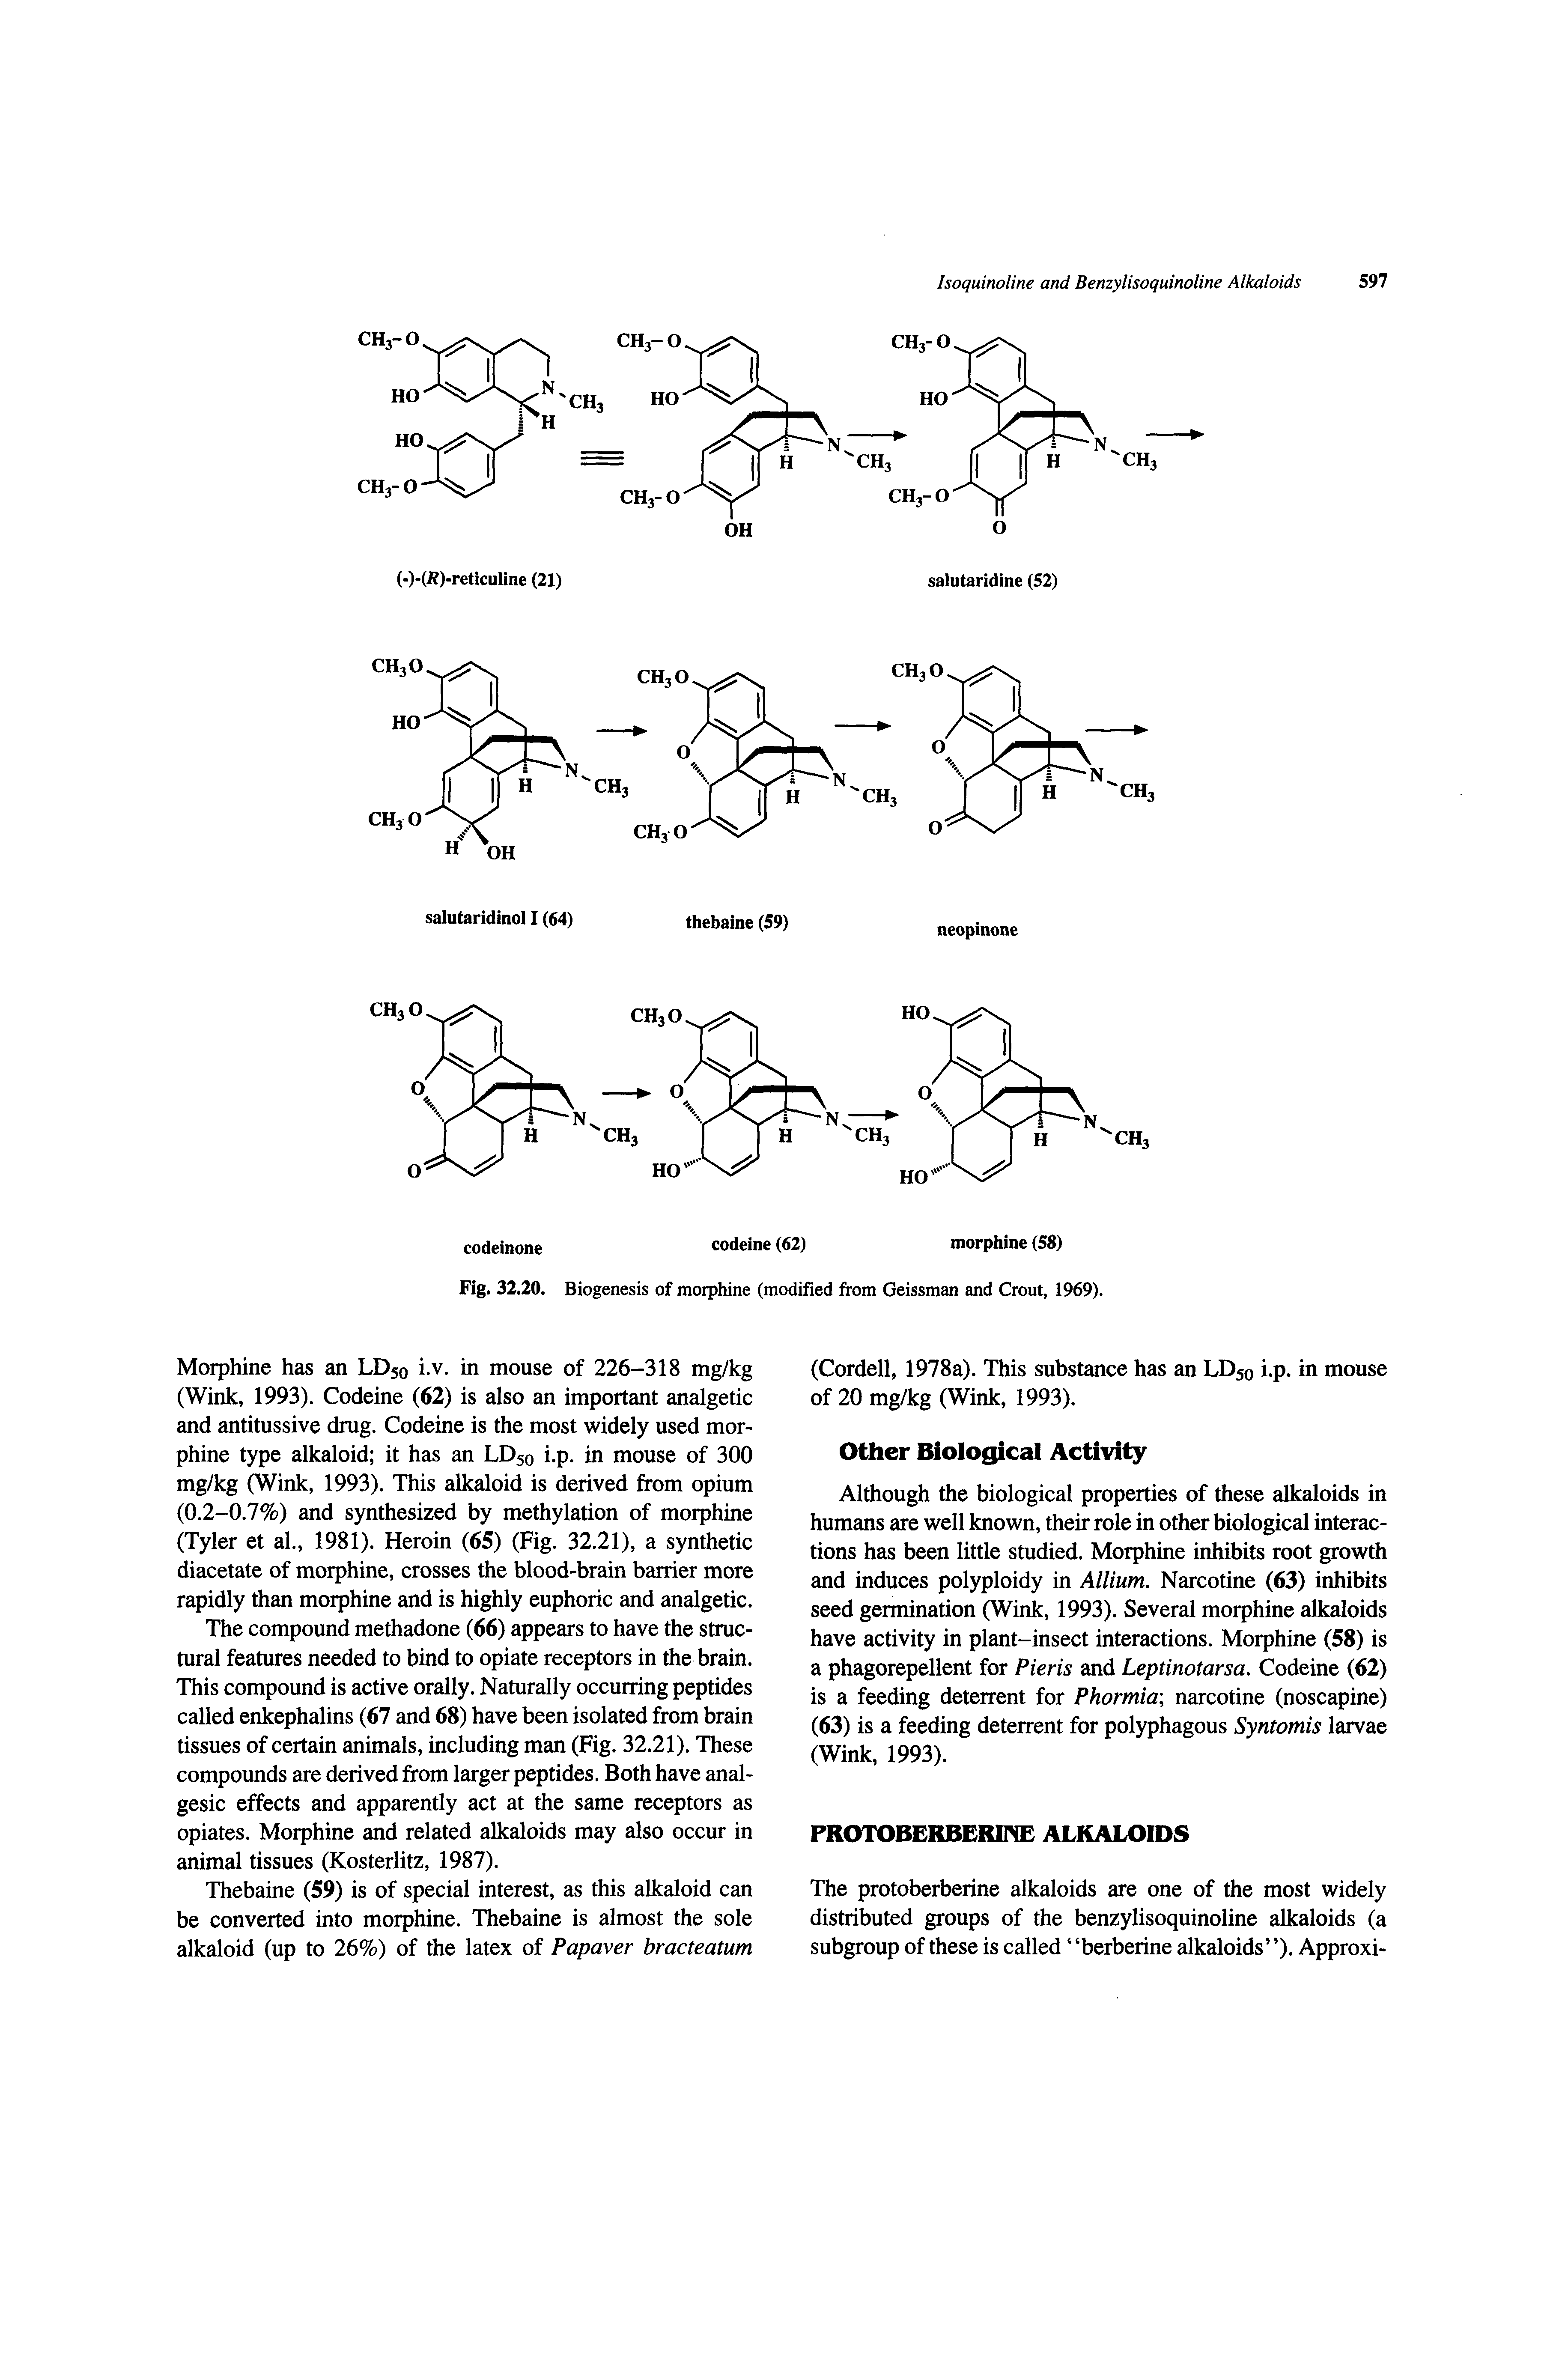 Fig. 32.20. Biogenesis of morphine (modified from Geissman and Grout, 1969).